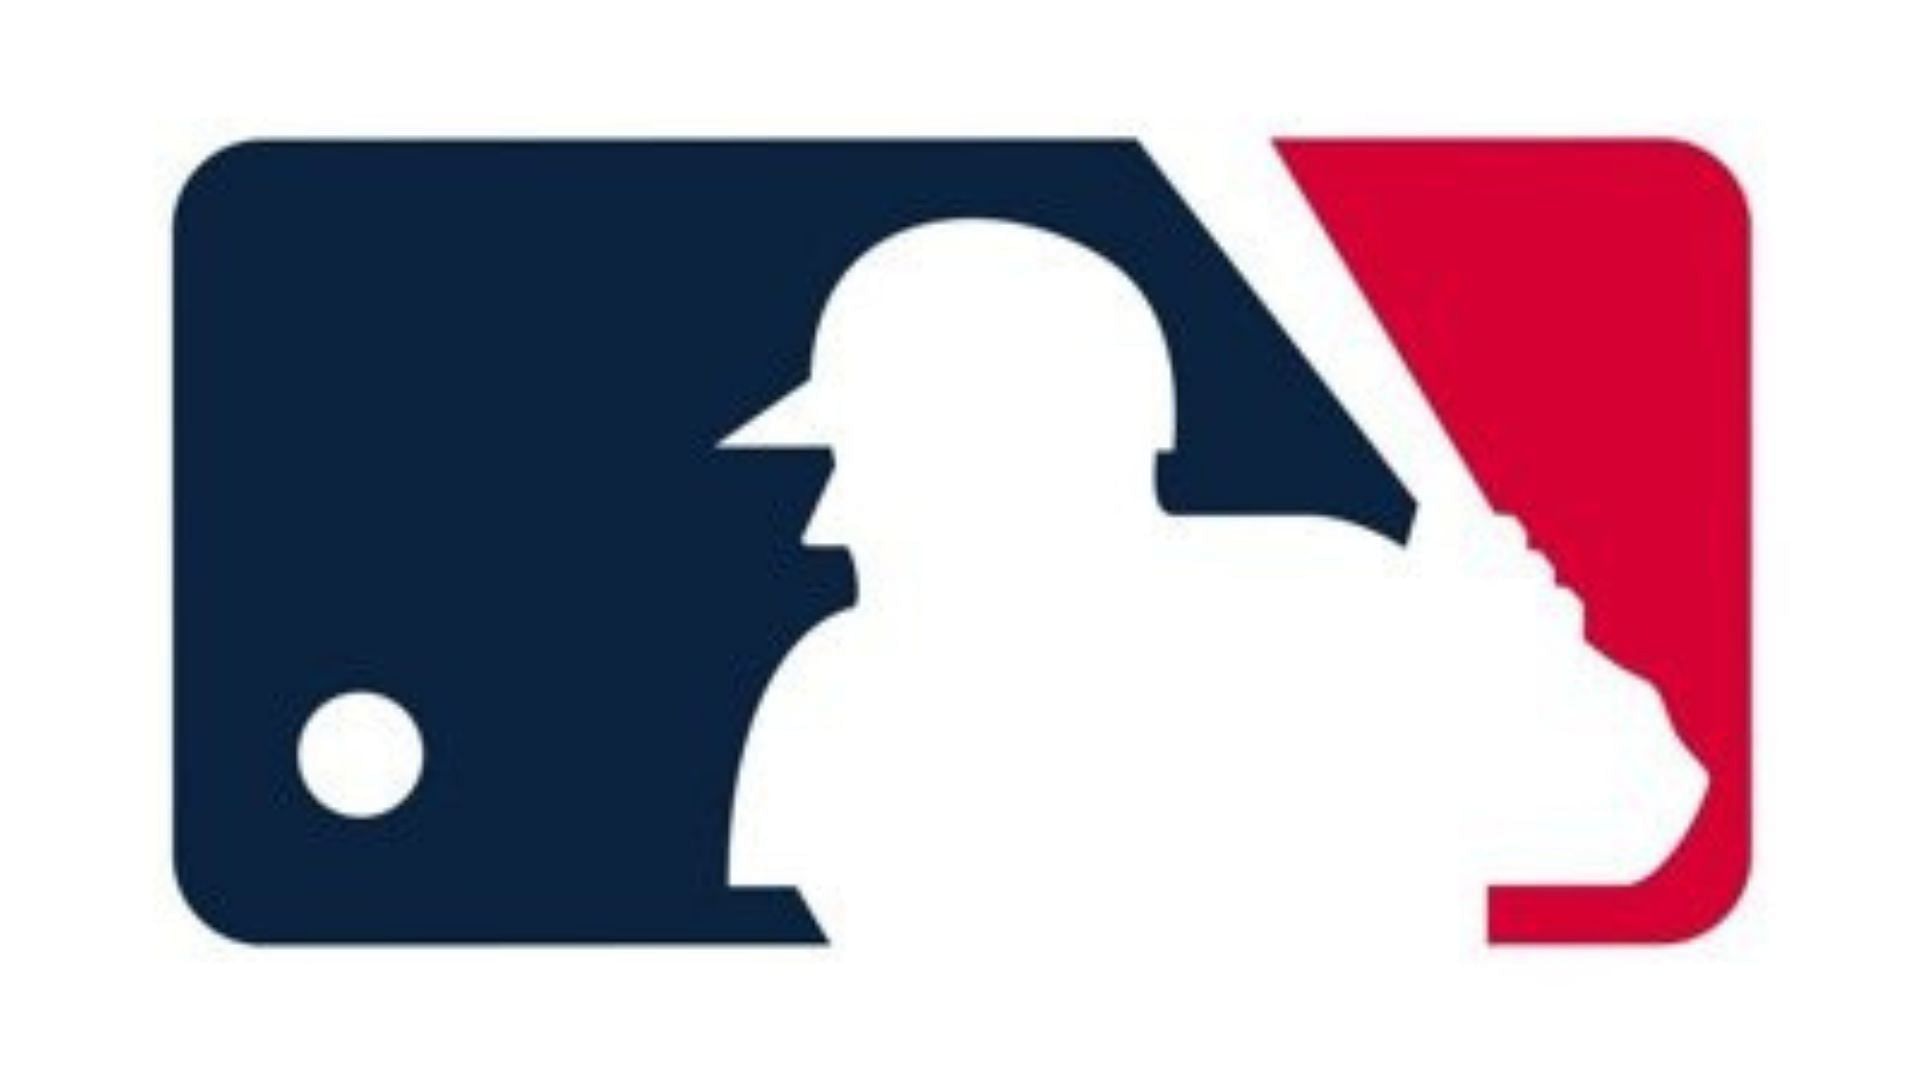 Red Poppy Flower Patches Across MLB on Memorial Day – SportsLogos